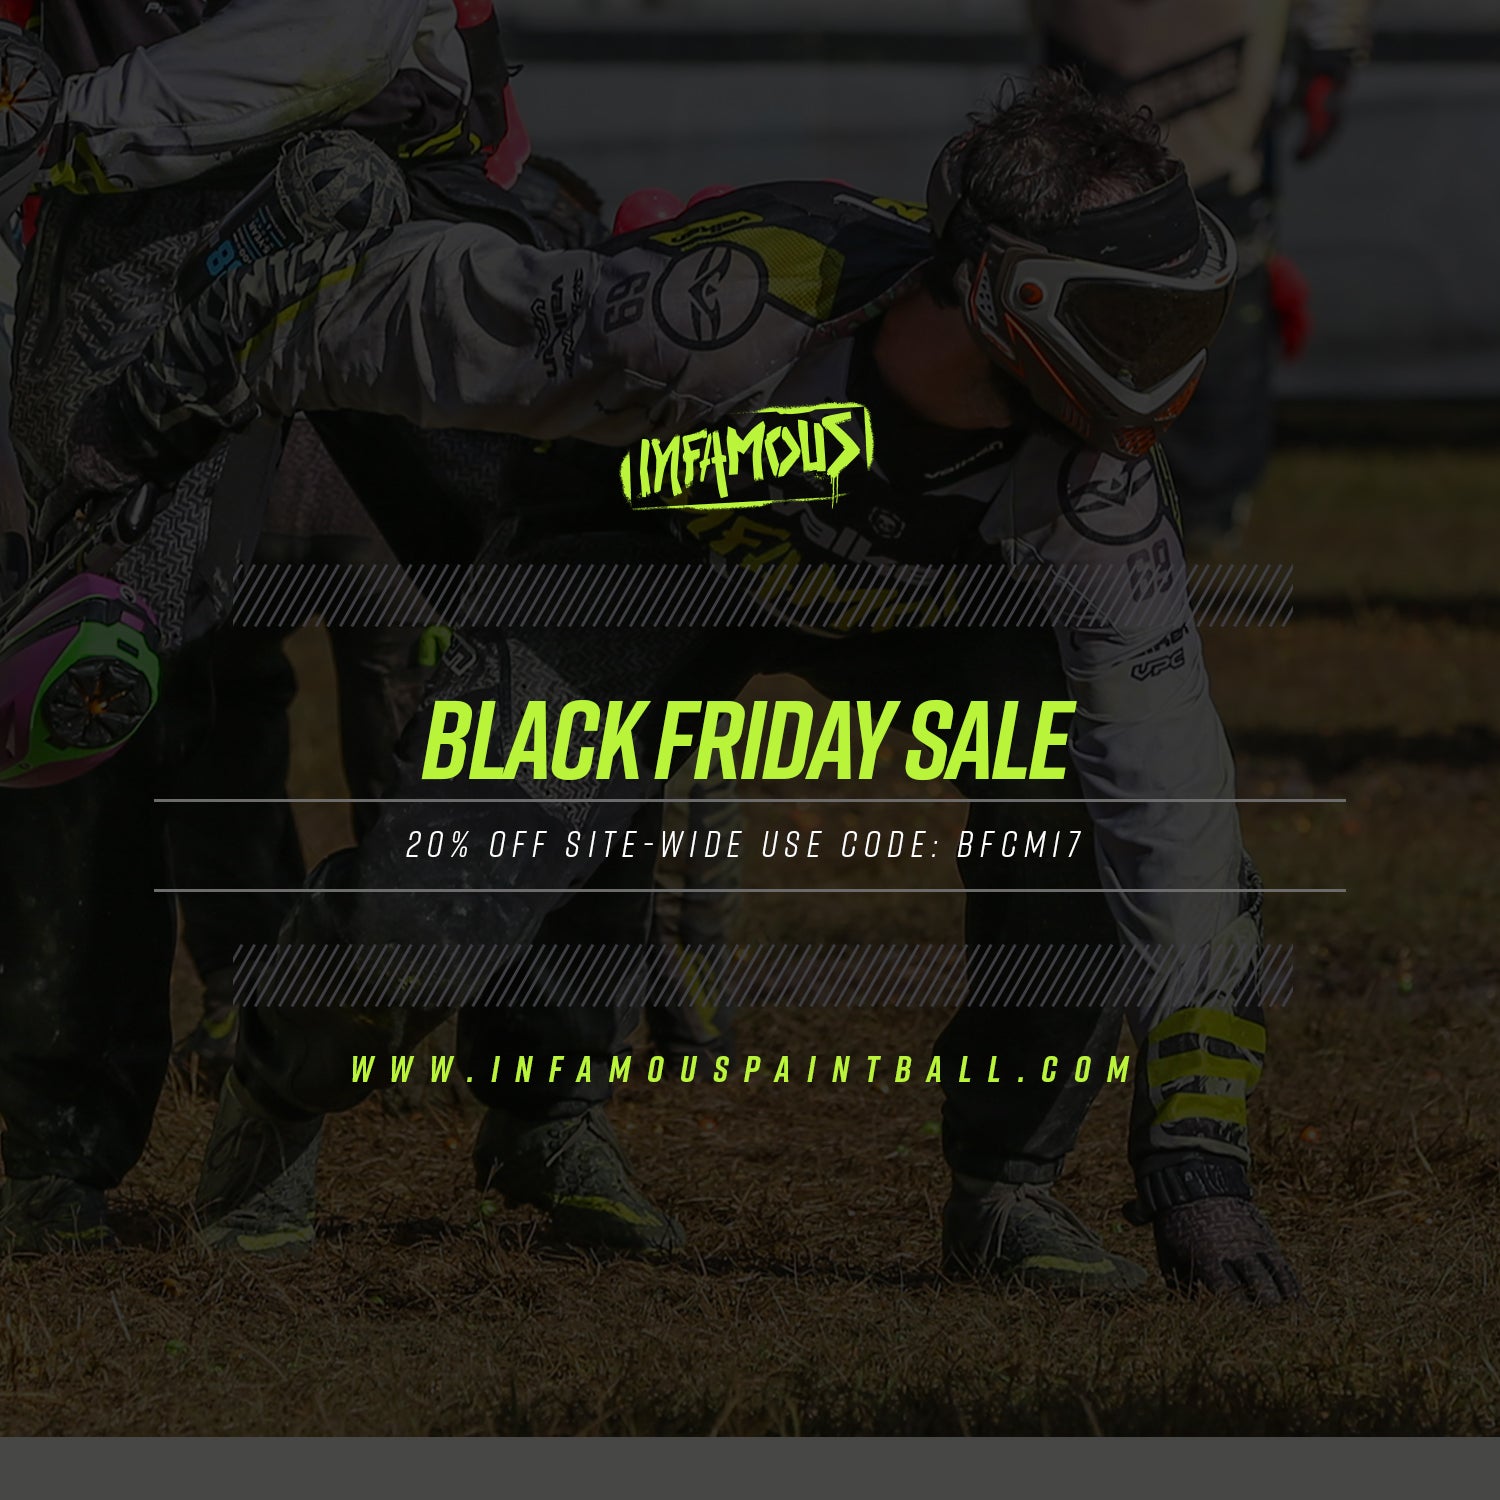 Black Friday Paintball Sales With Infamous